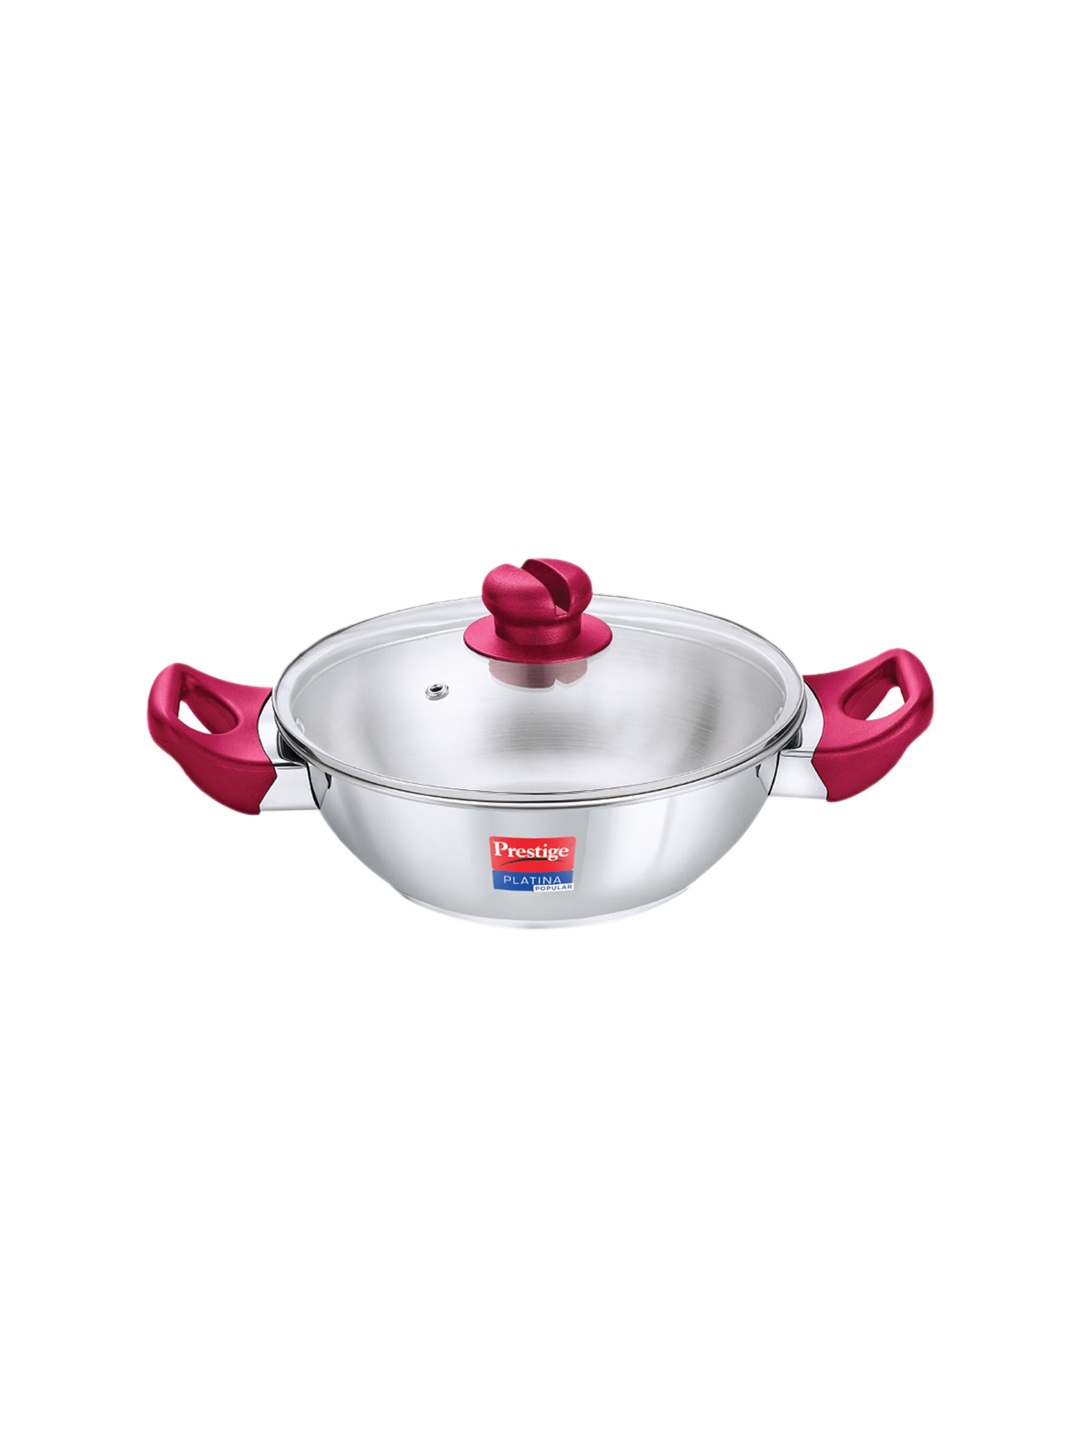 

Prestige Platina Popular Stainless Steel Kadai With Toughened Glass Lid, Silver